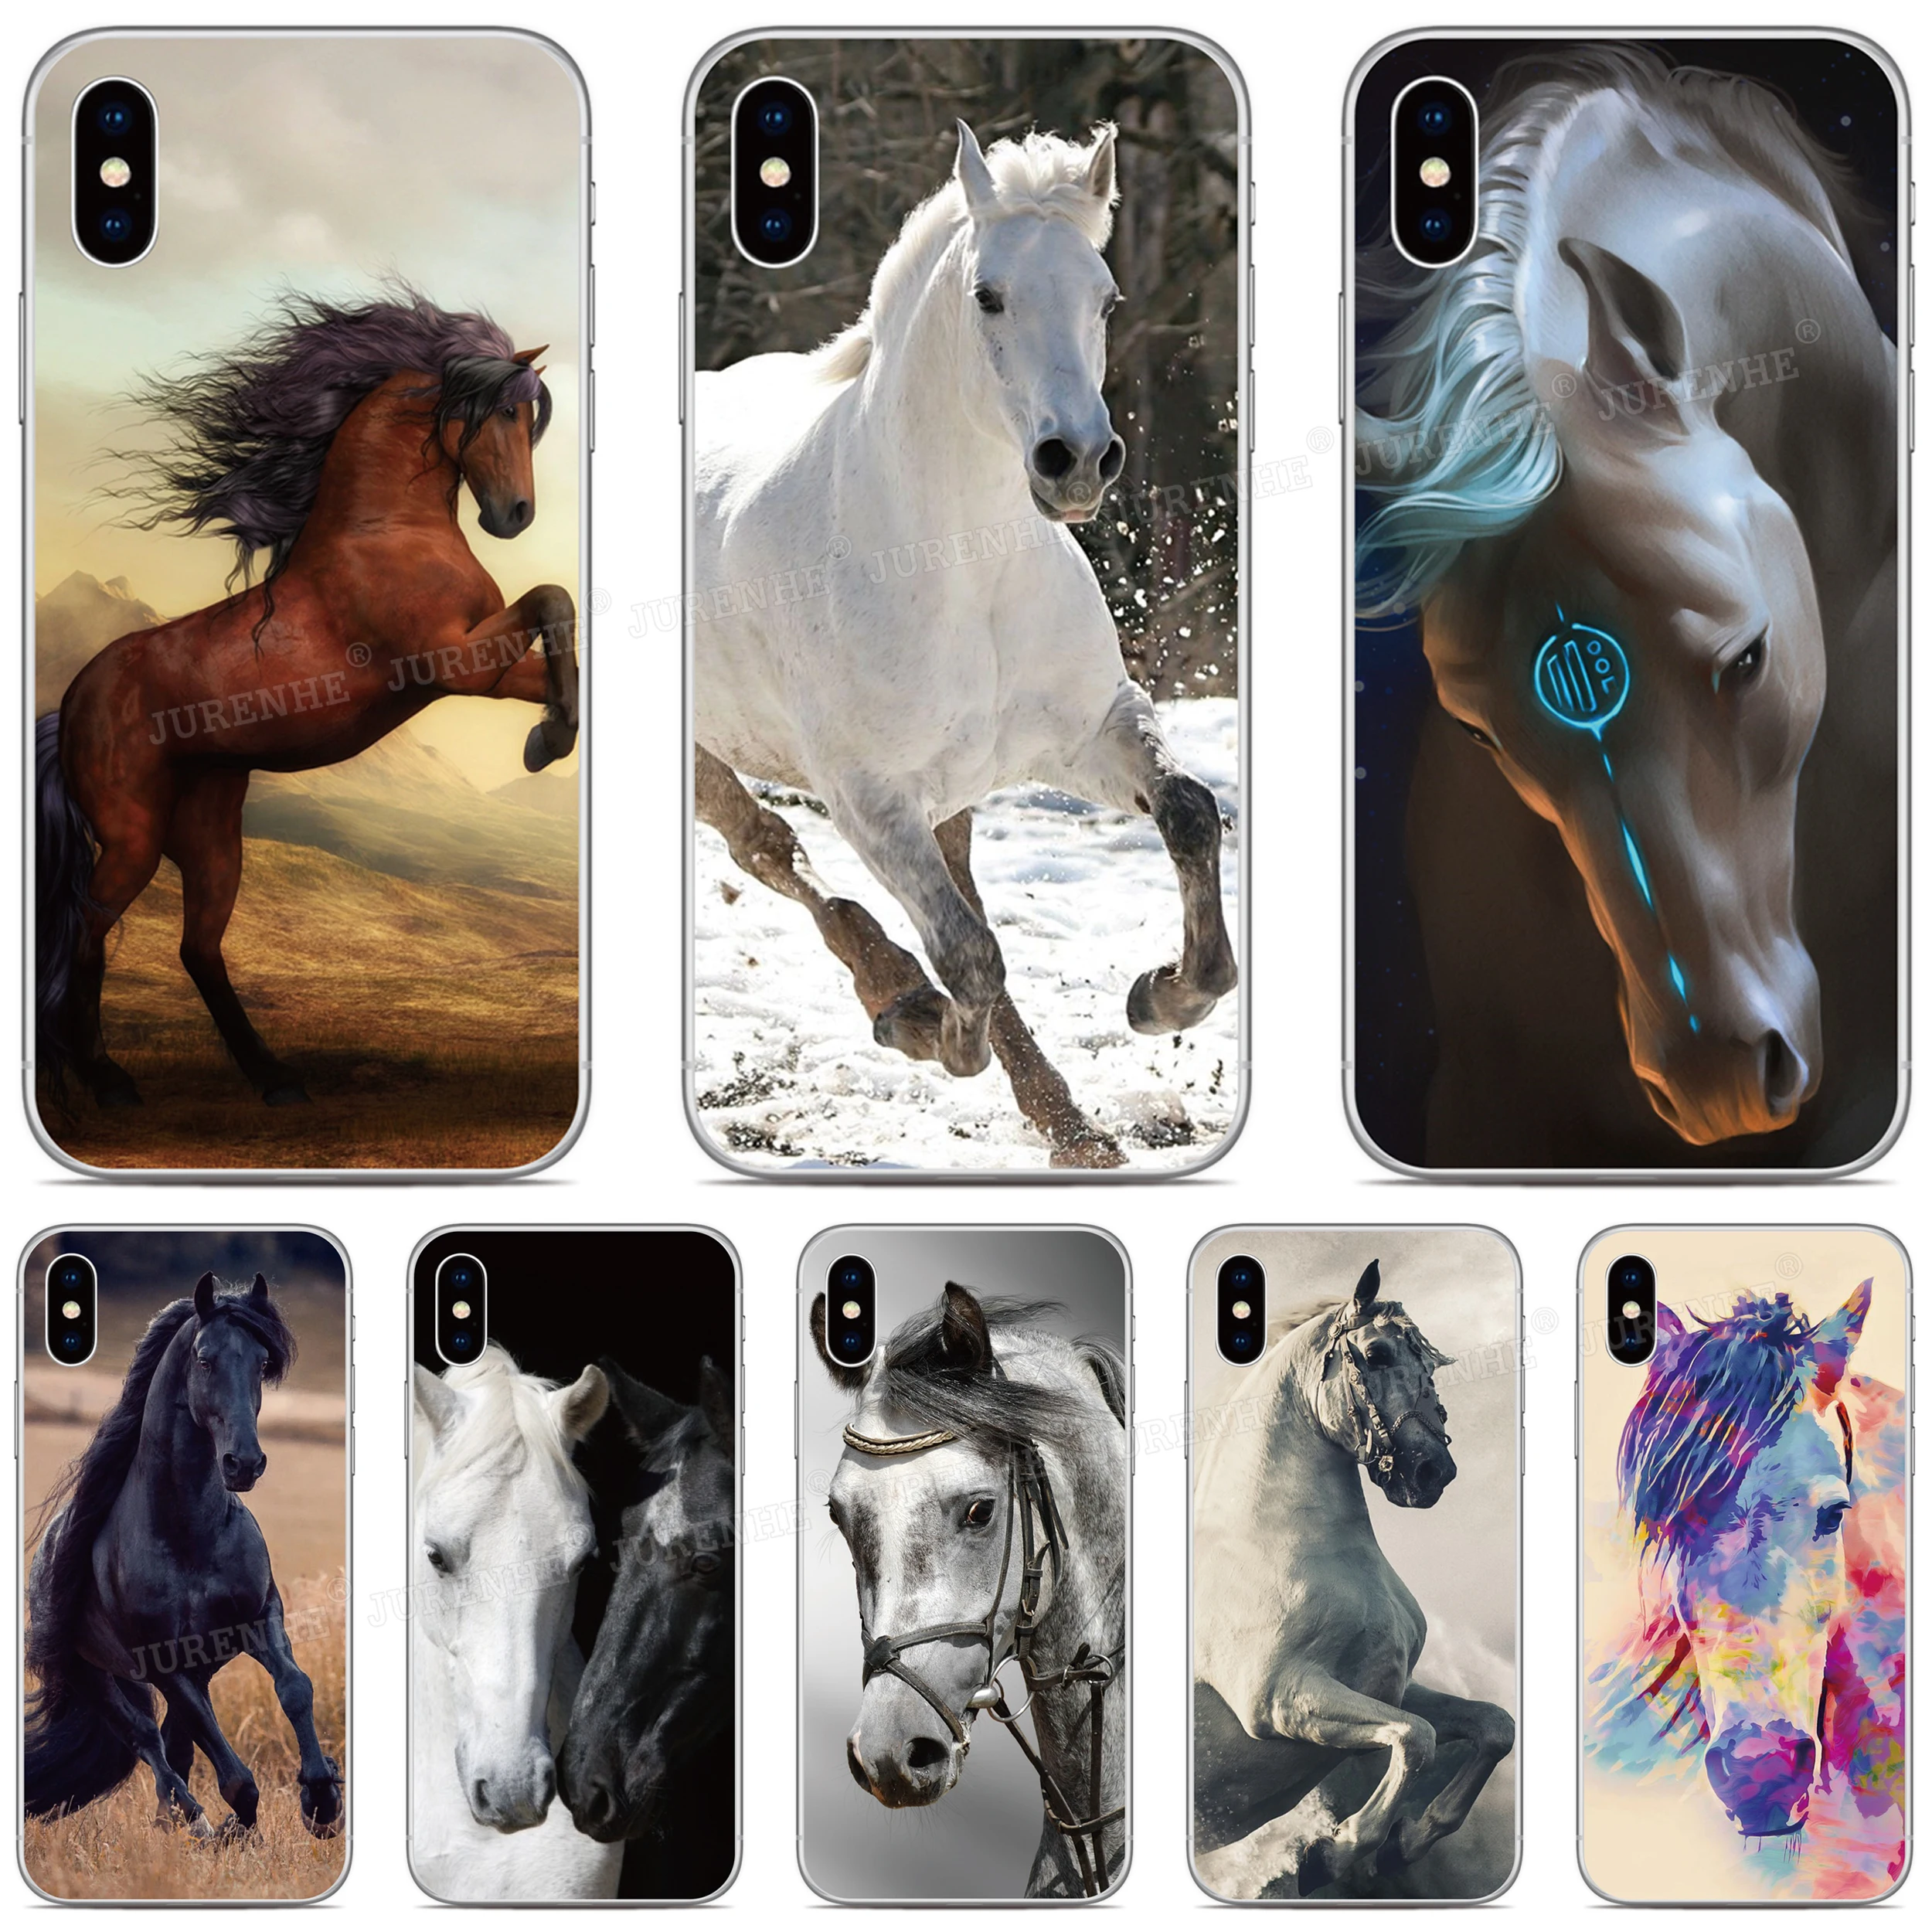 For iPhone 12 Mini 11 Pro XS Max XR X 6 7 8 Plus SE2 SE 2020 Black White Horse Silicone Phone Case For iPod Touch 7 6 5 Cover